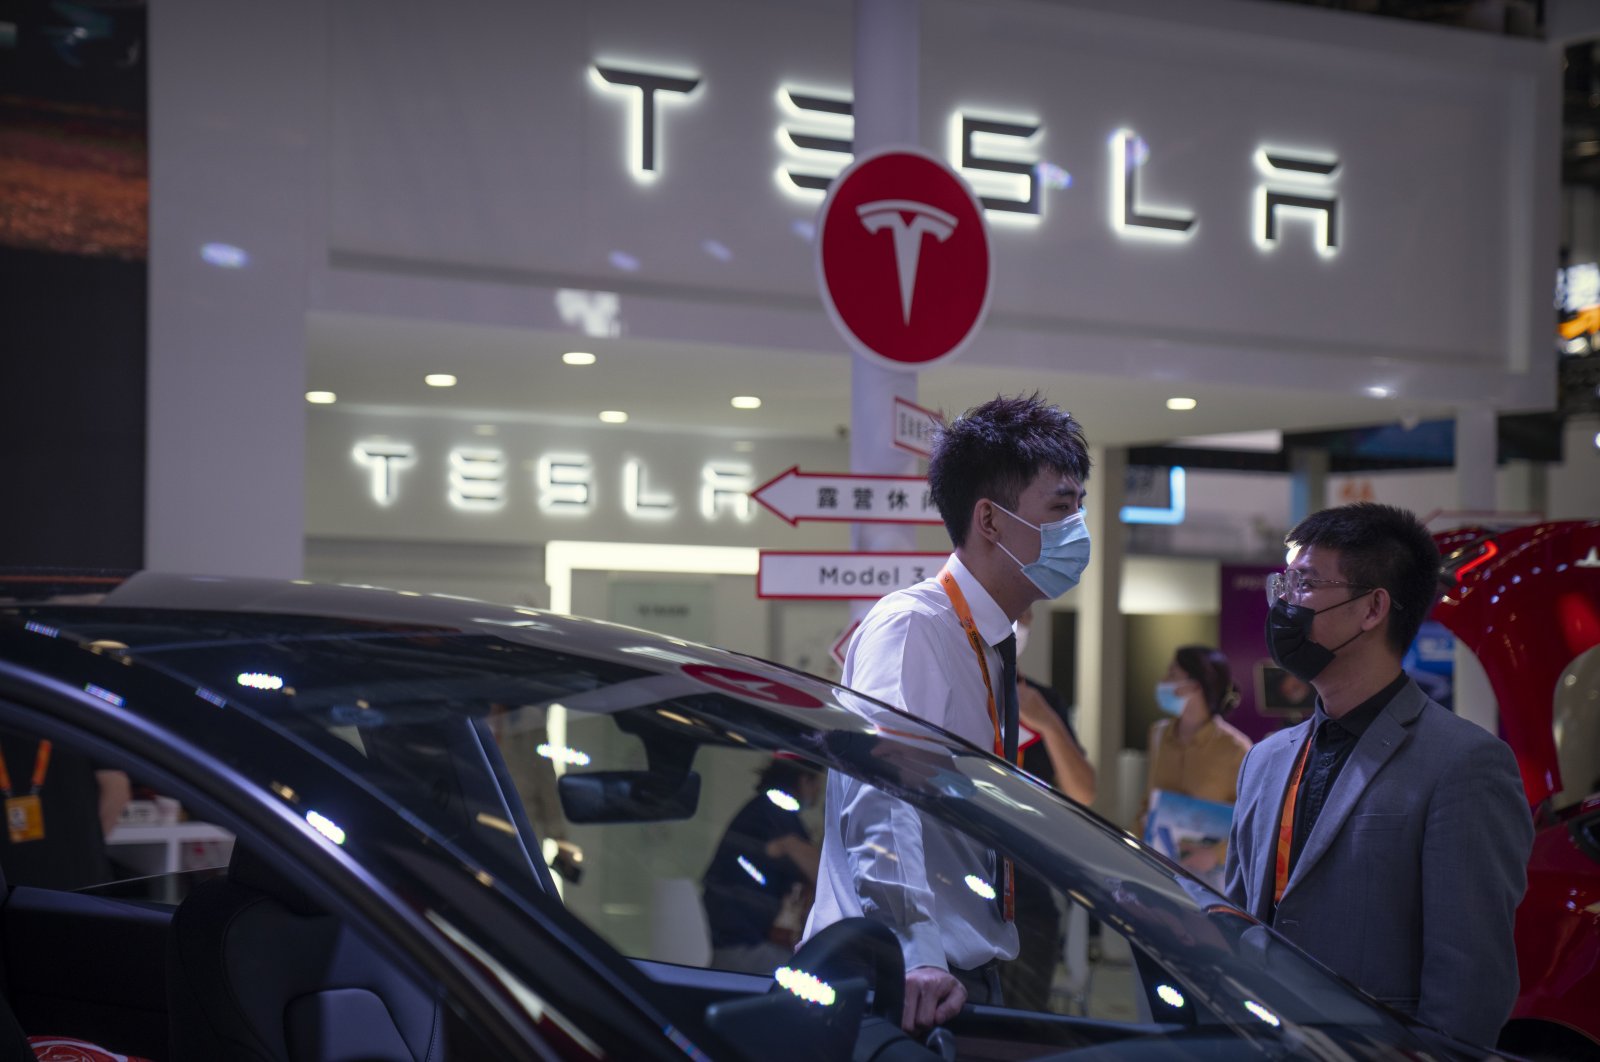 Staff members talk near vehicles at a display for automaker Tesla at the China International Fair for Trade in Services (CIFTIS) in Beijing, China, Sept. 2, 2022. (AP Photo)